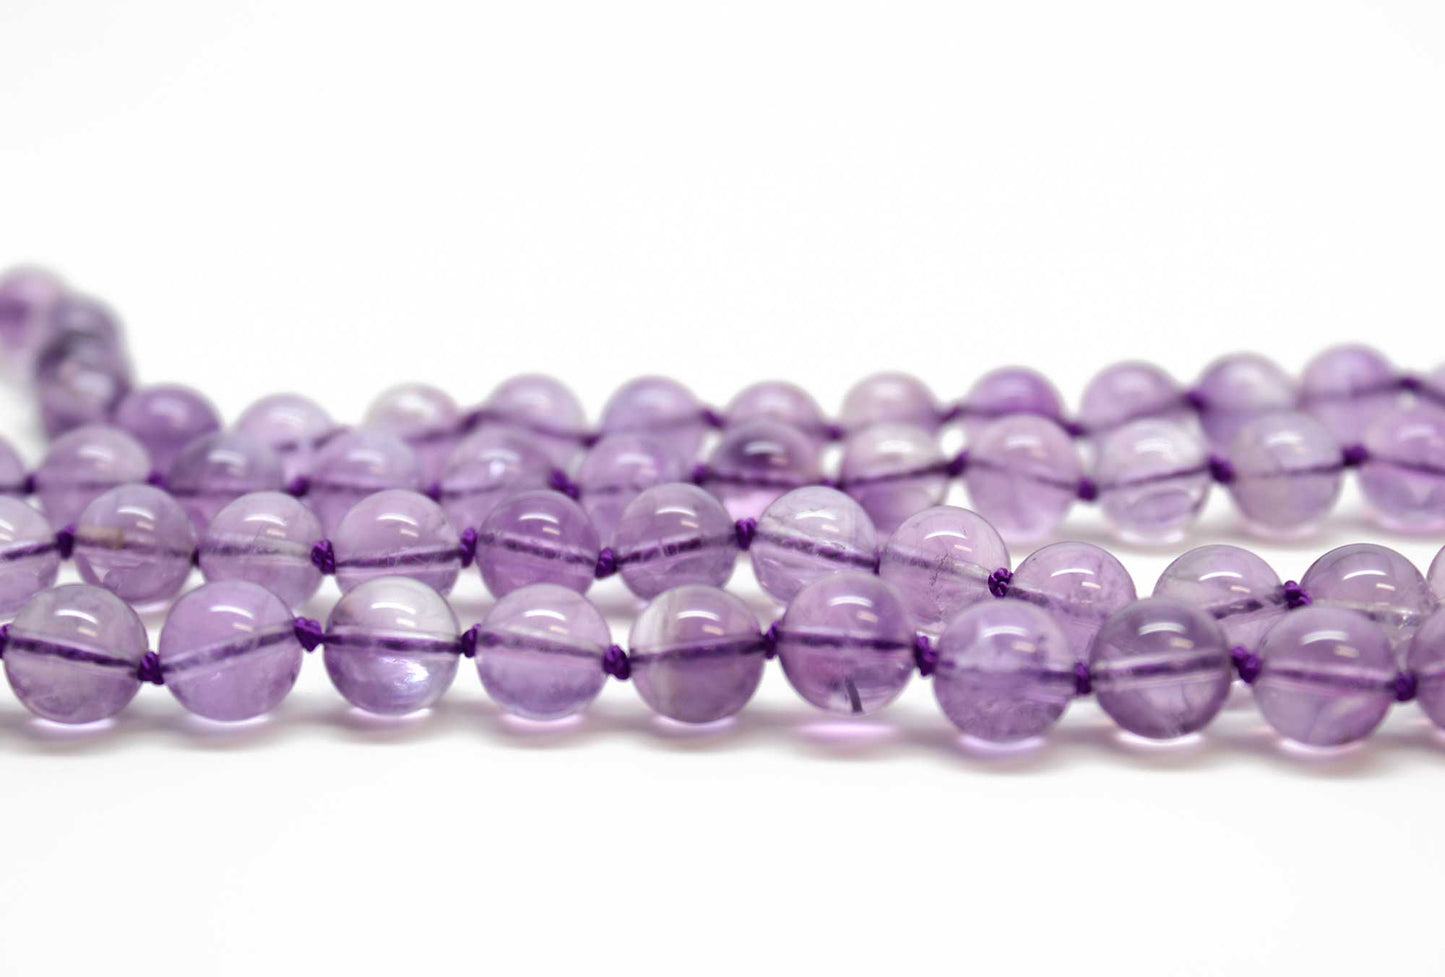 Knotted Amethyst Bead Necklace